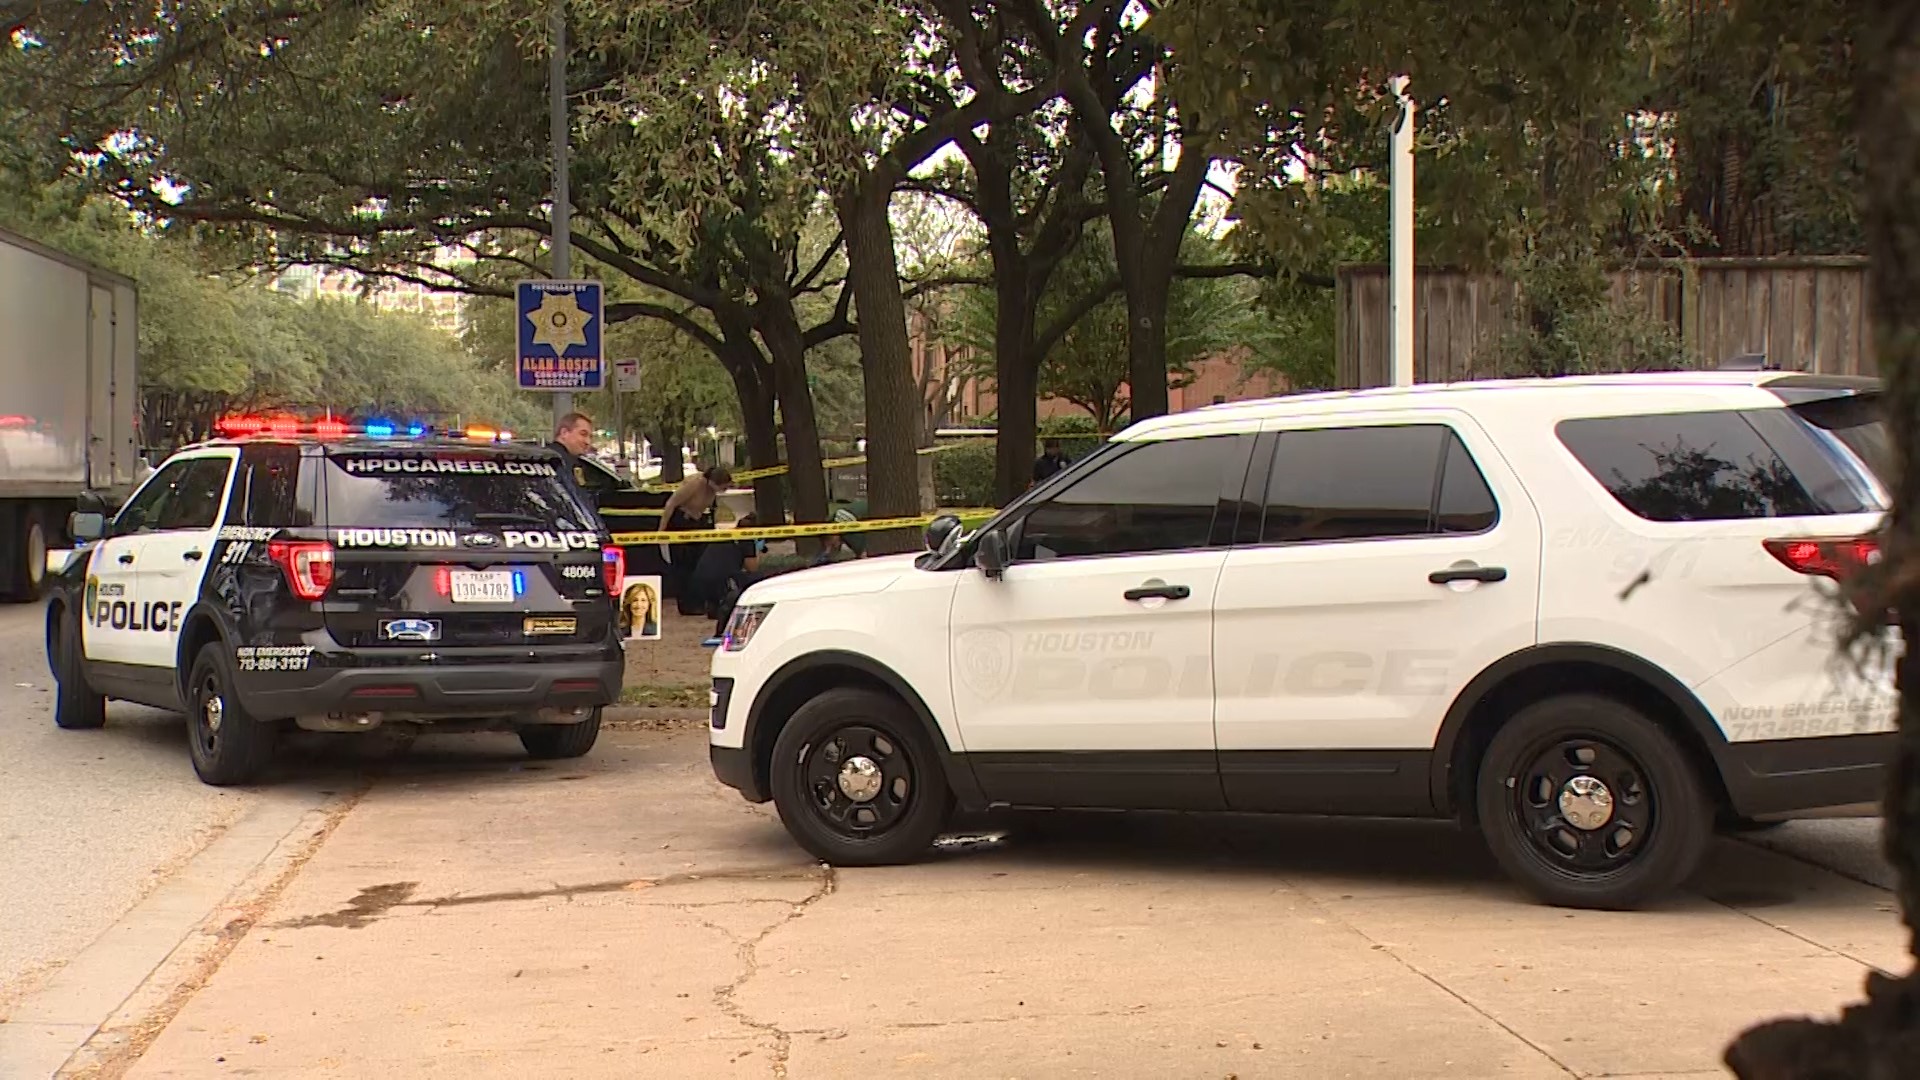 Houston police homicide investigators responded to reports of a man’s body found on a sidewalk in Montrose early Monday.